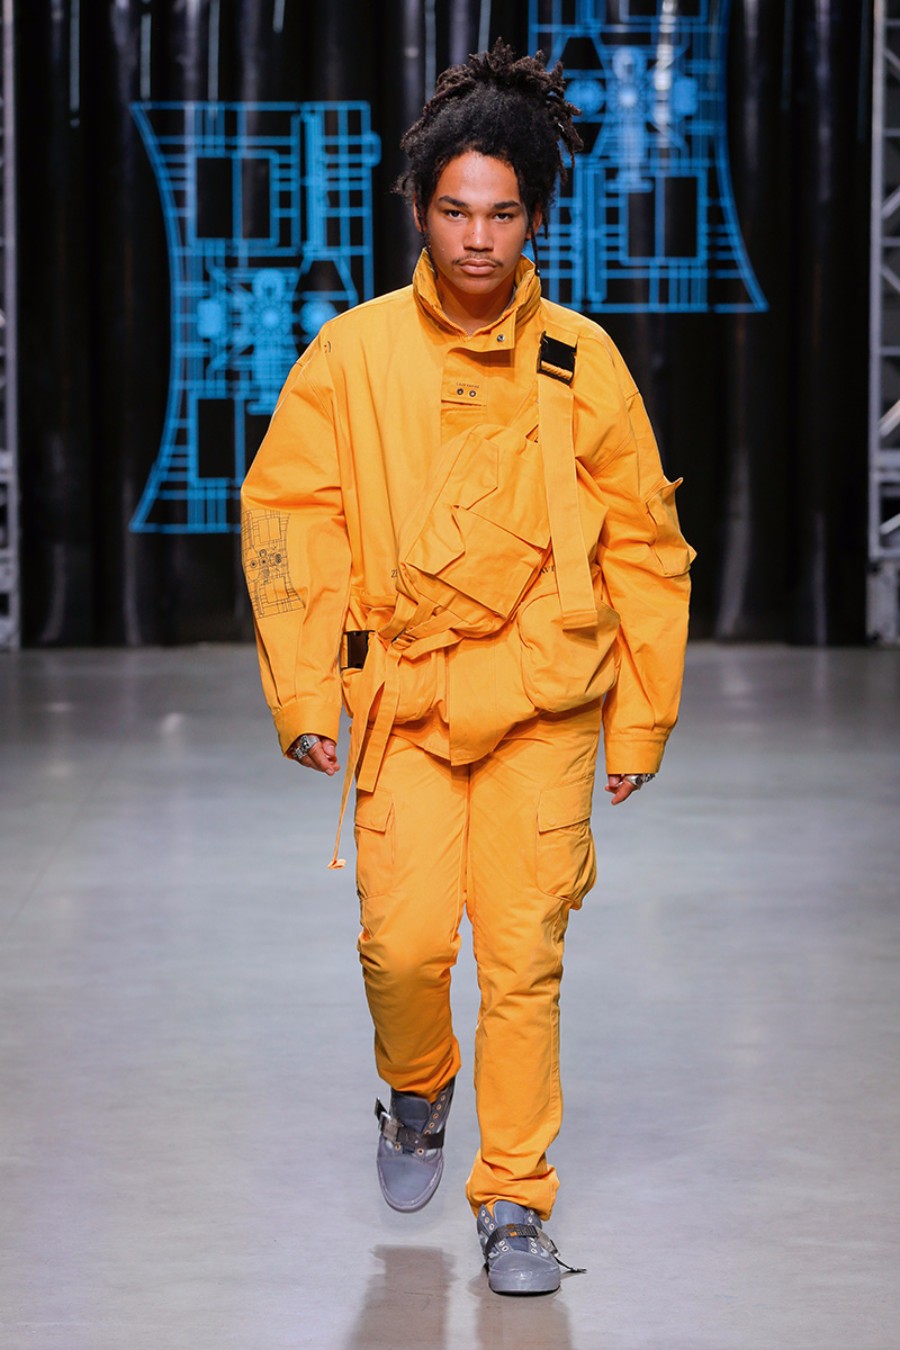 NYFWM: C2H4 Spring/Summer 2018 Collection